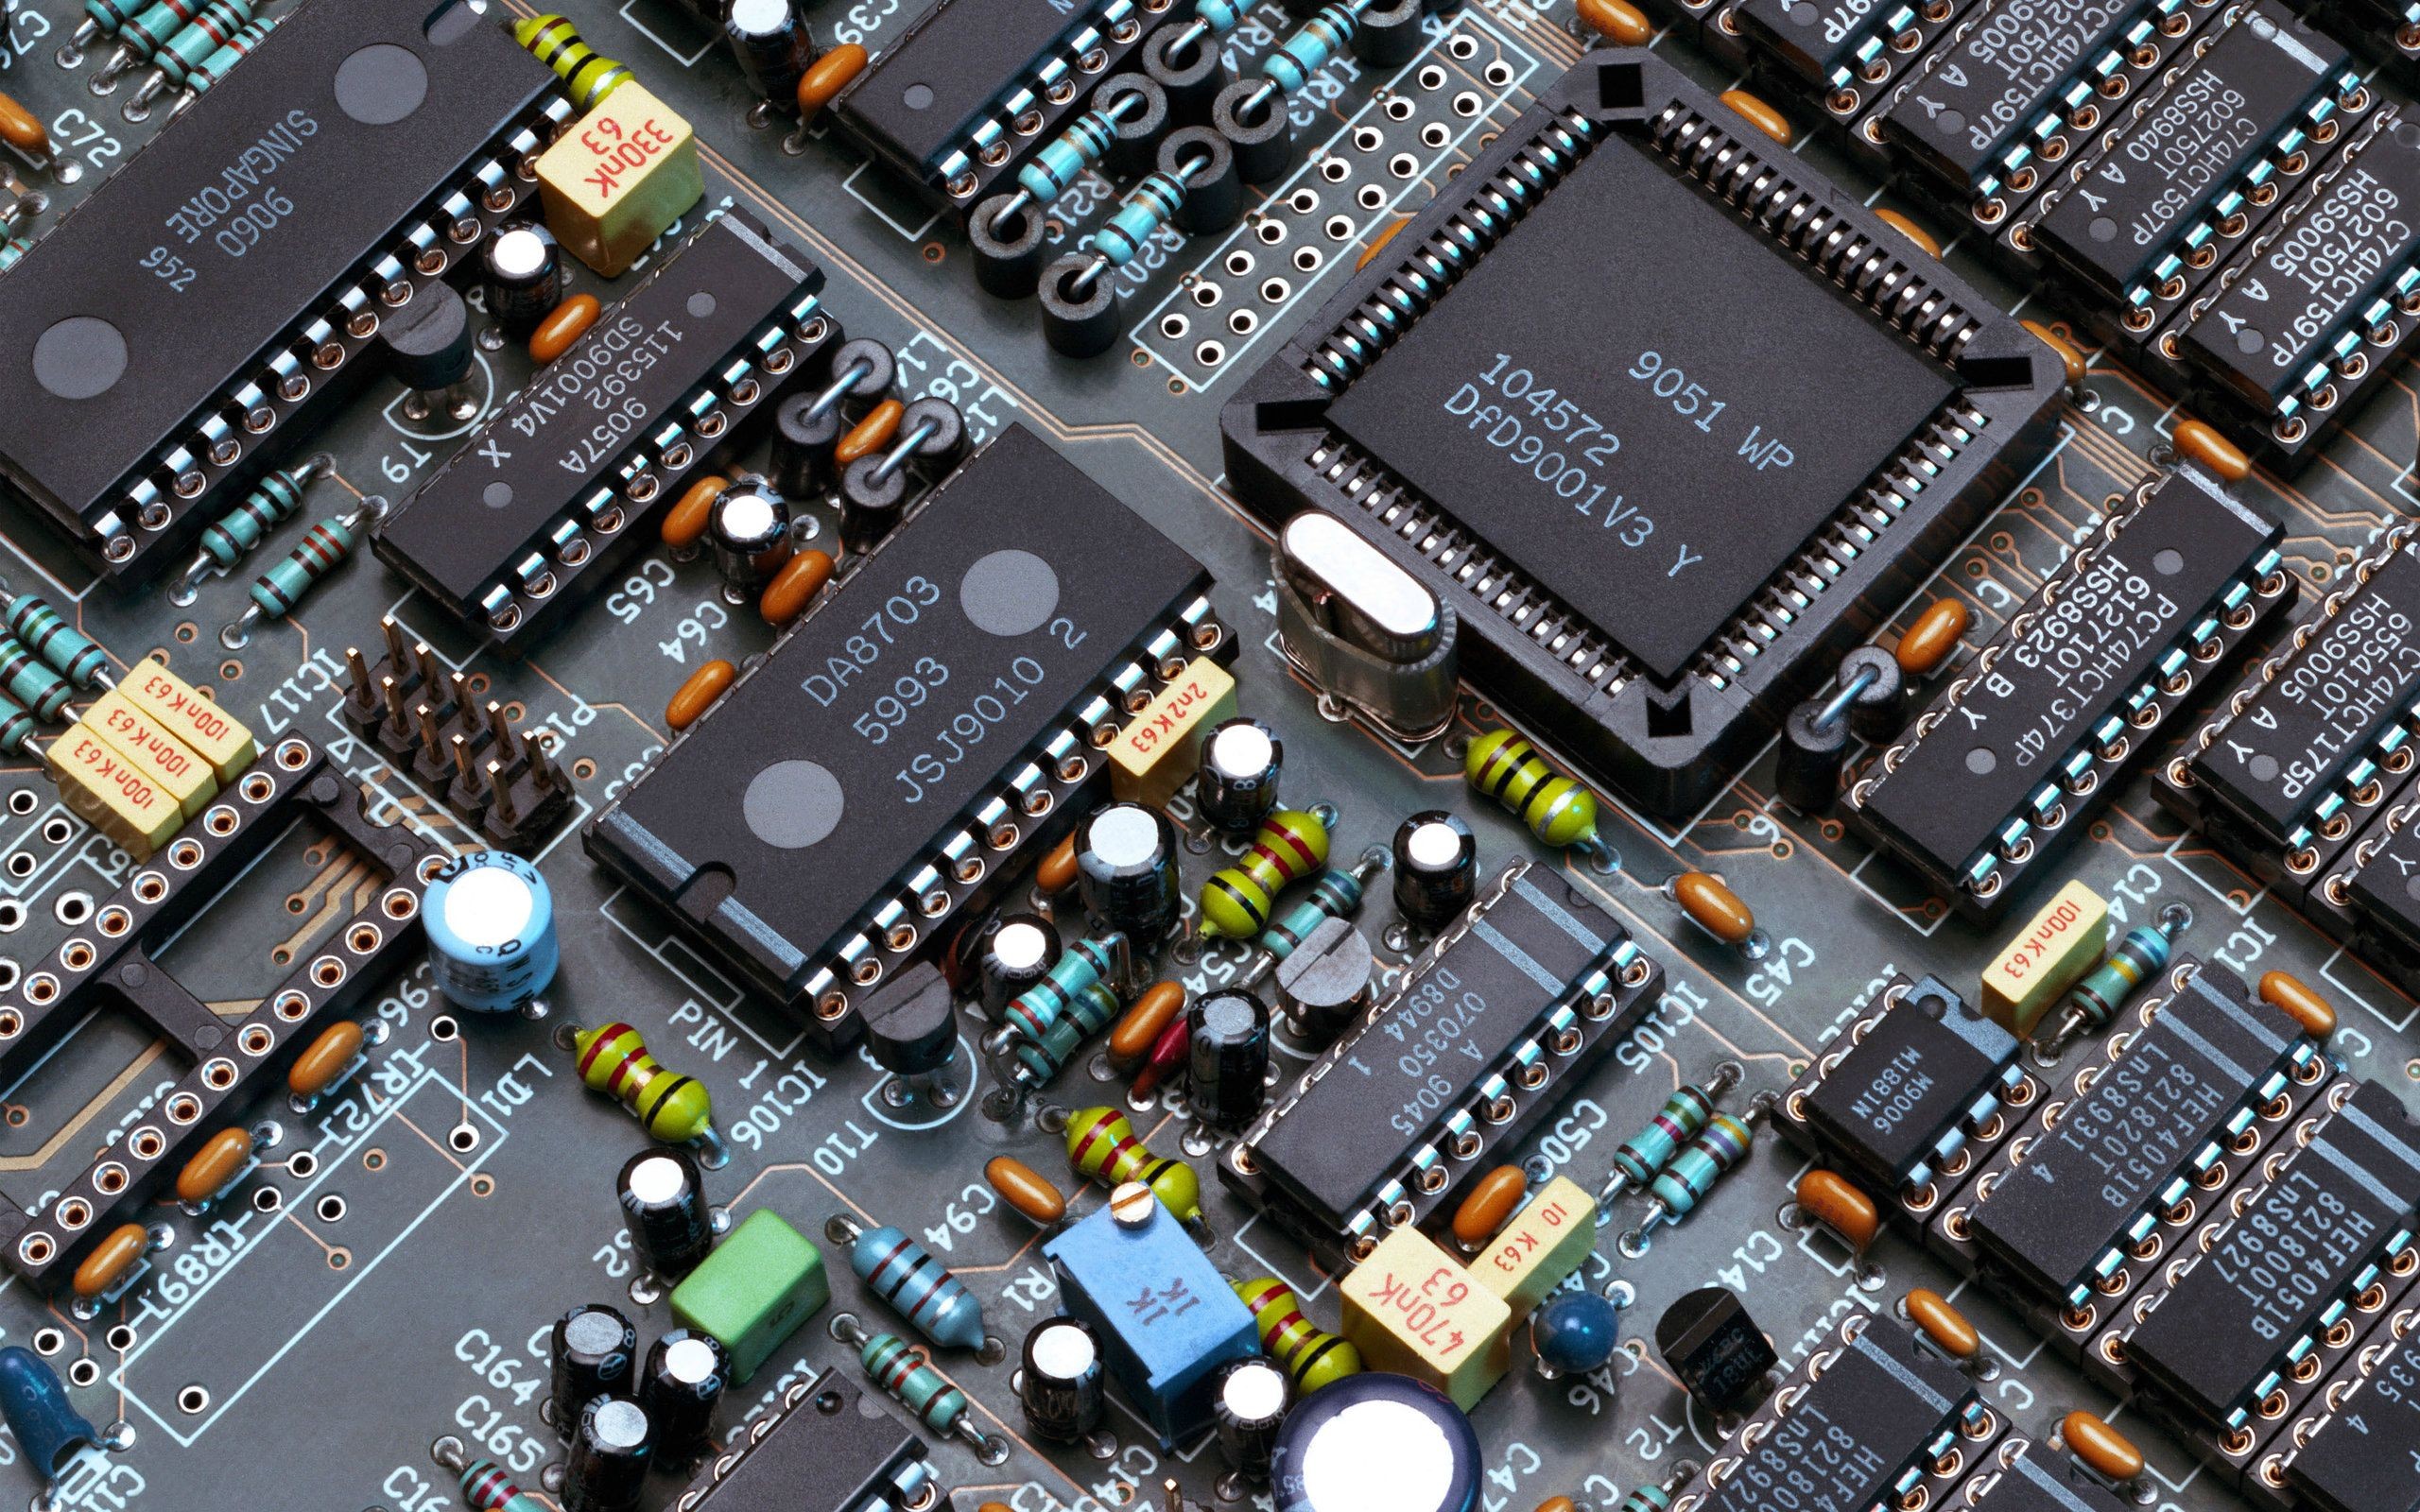 Wallpaper, technology, PCB, electronics, circuit boards, screenshot, gadget, personal computer hardware, electronic device, microcontroller, motherboard, electronic engineering 2560x1600